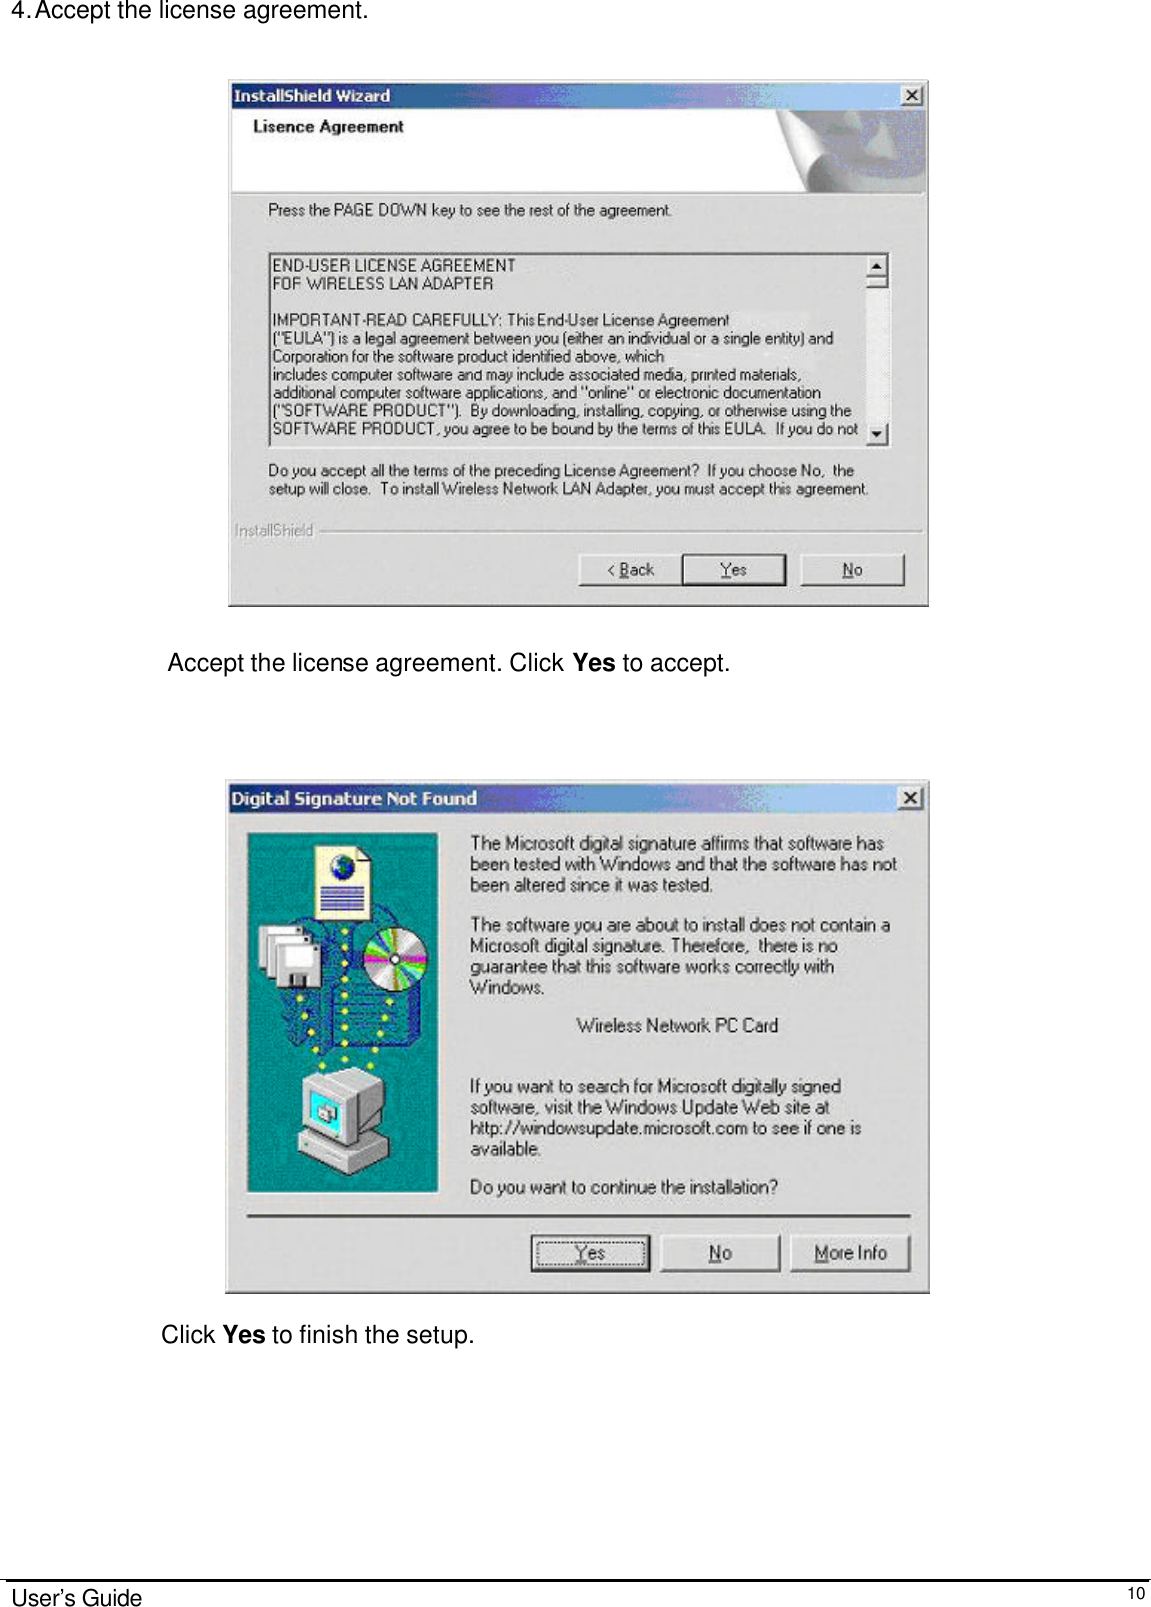                                                                                                                                                                              User’s Guide  10 4. Accept the license agreement.     Accept the license agreement. Click Yes to accept.                          Click Yes to finish the setup.  